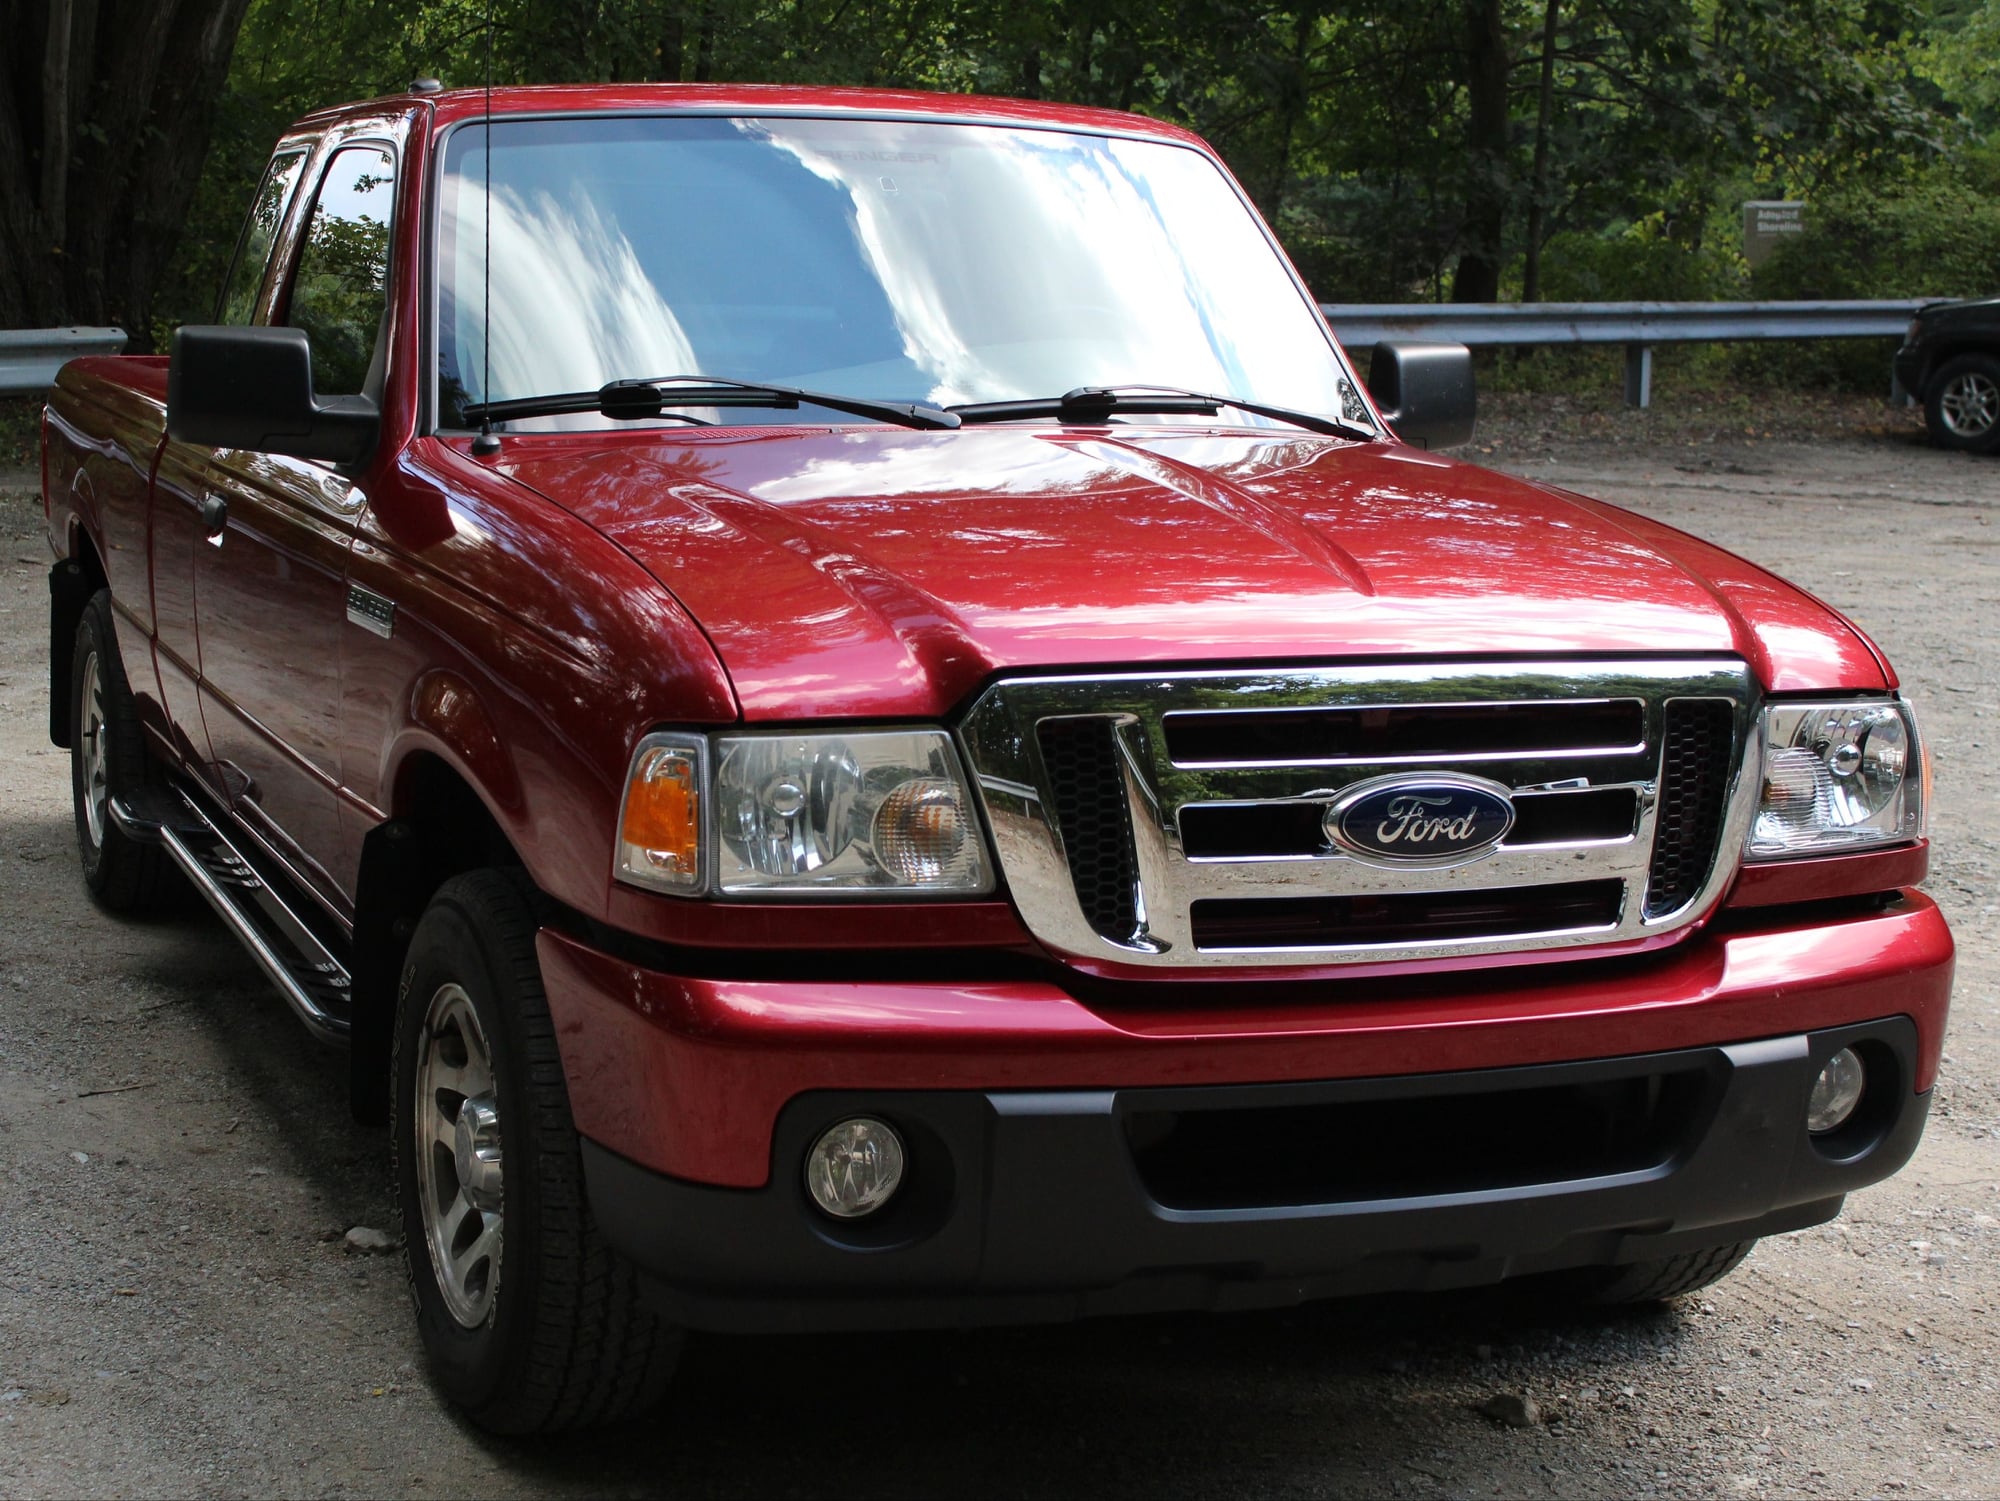 13westbays Red Ranger 2010 Ranger Forums The Ultimate Ford Ranger